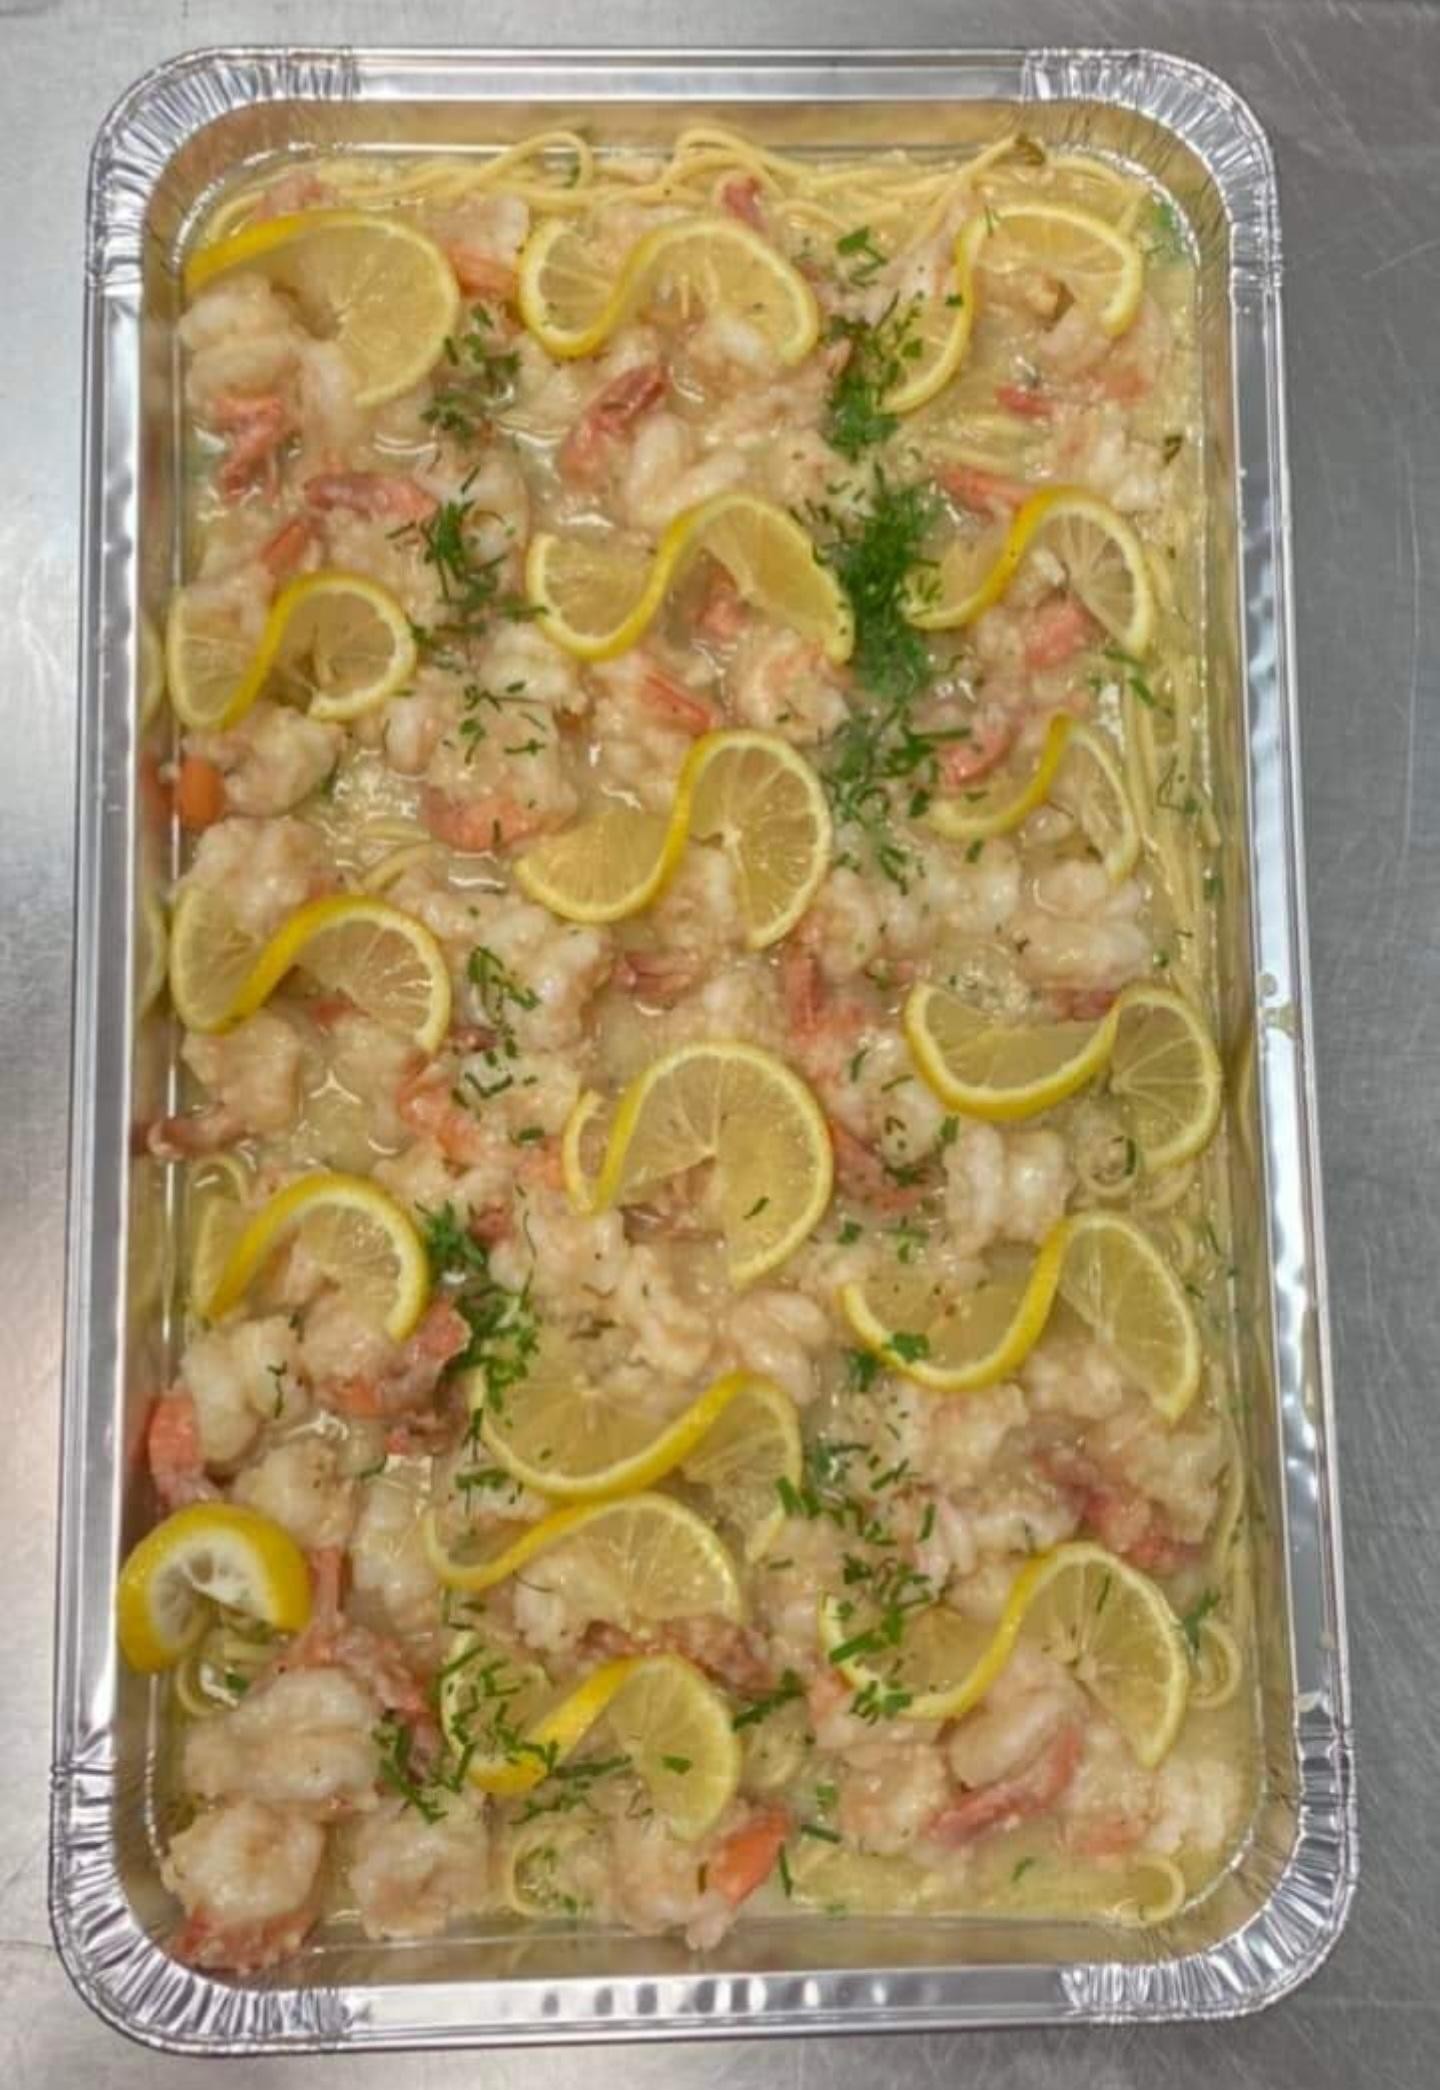 Shrimp Scampi (Sauteed in lemon, white wine and butter sauce)